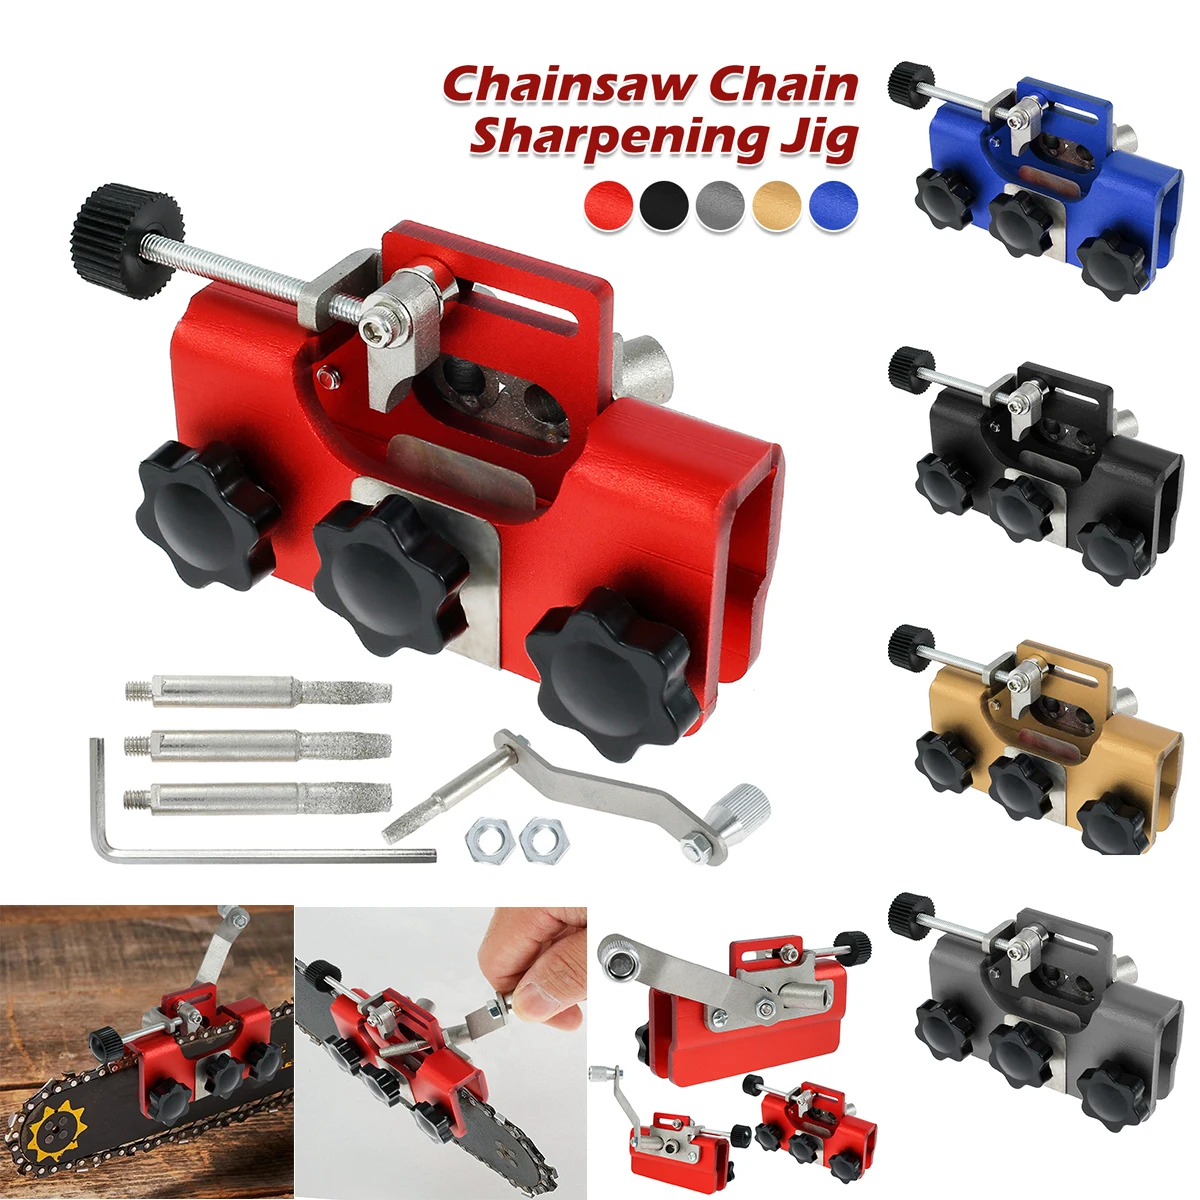 

Portable Chainsaw Sharpener Jig Manual Chain Grinding Tools With Sharpening Heads For All Kinds Chain Saws And Electric Saws